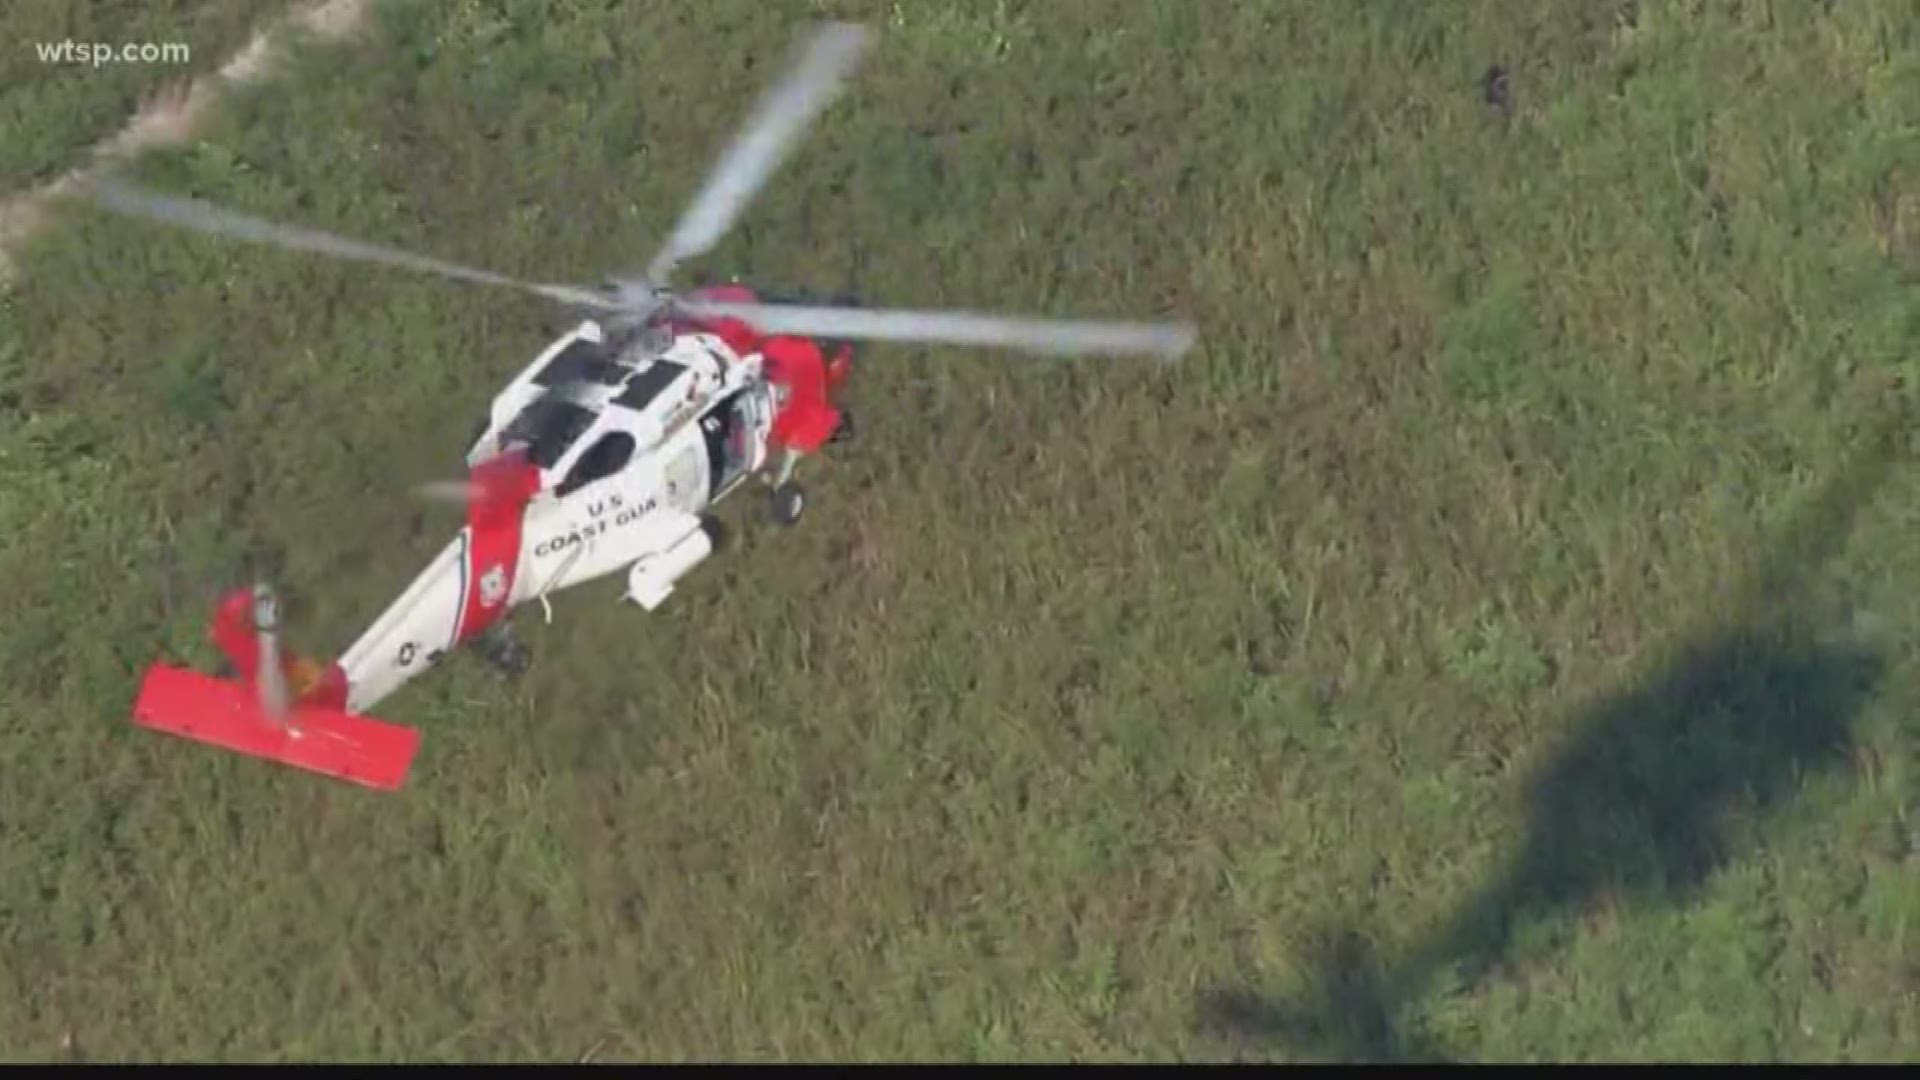 Both pilots are OK. The U.S. Coast Guard was able to airlift them both from the scene.